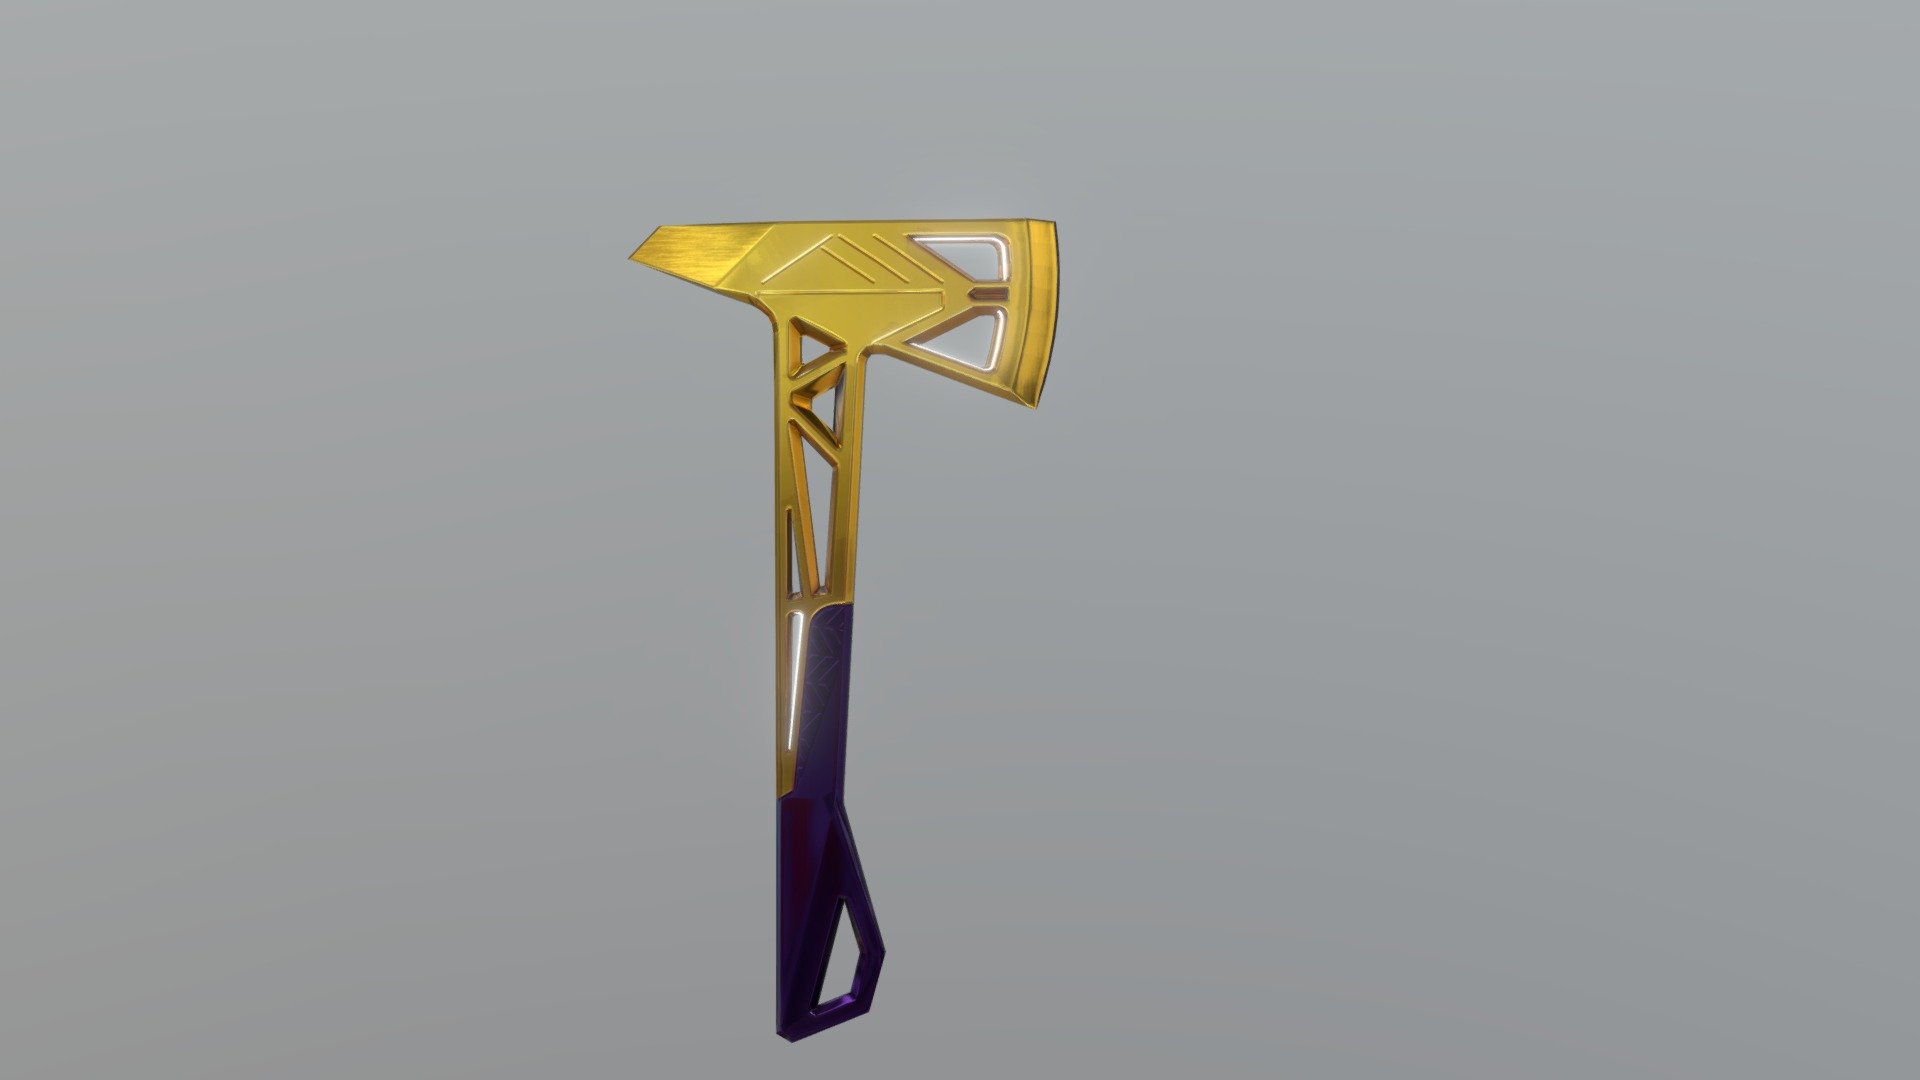 Prime Axe from Valorant

I updated the old one that I uploaded last time 3d model